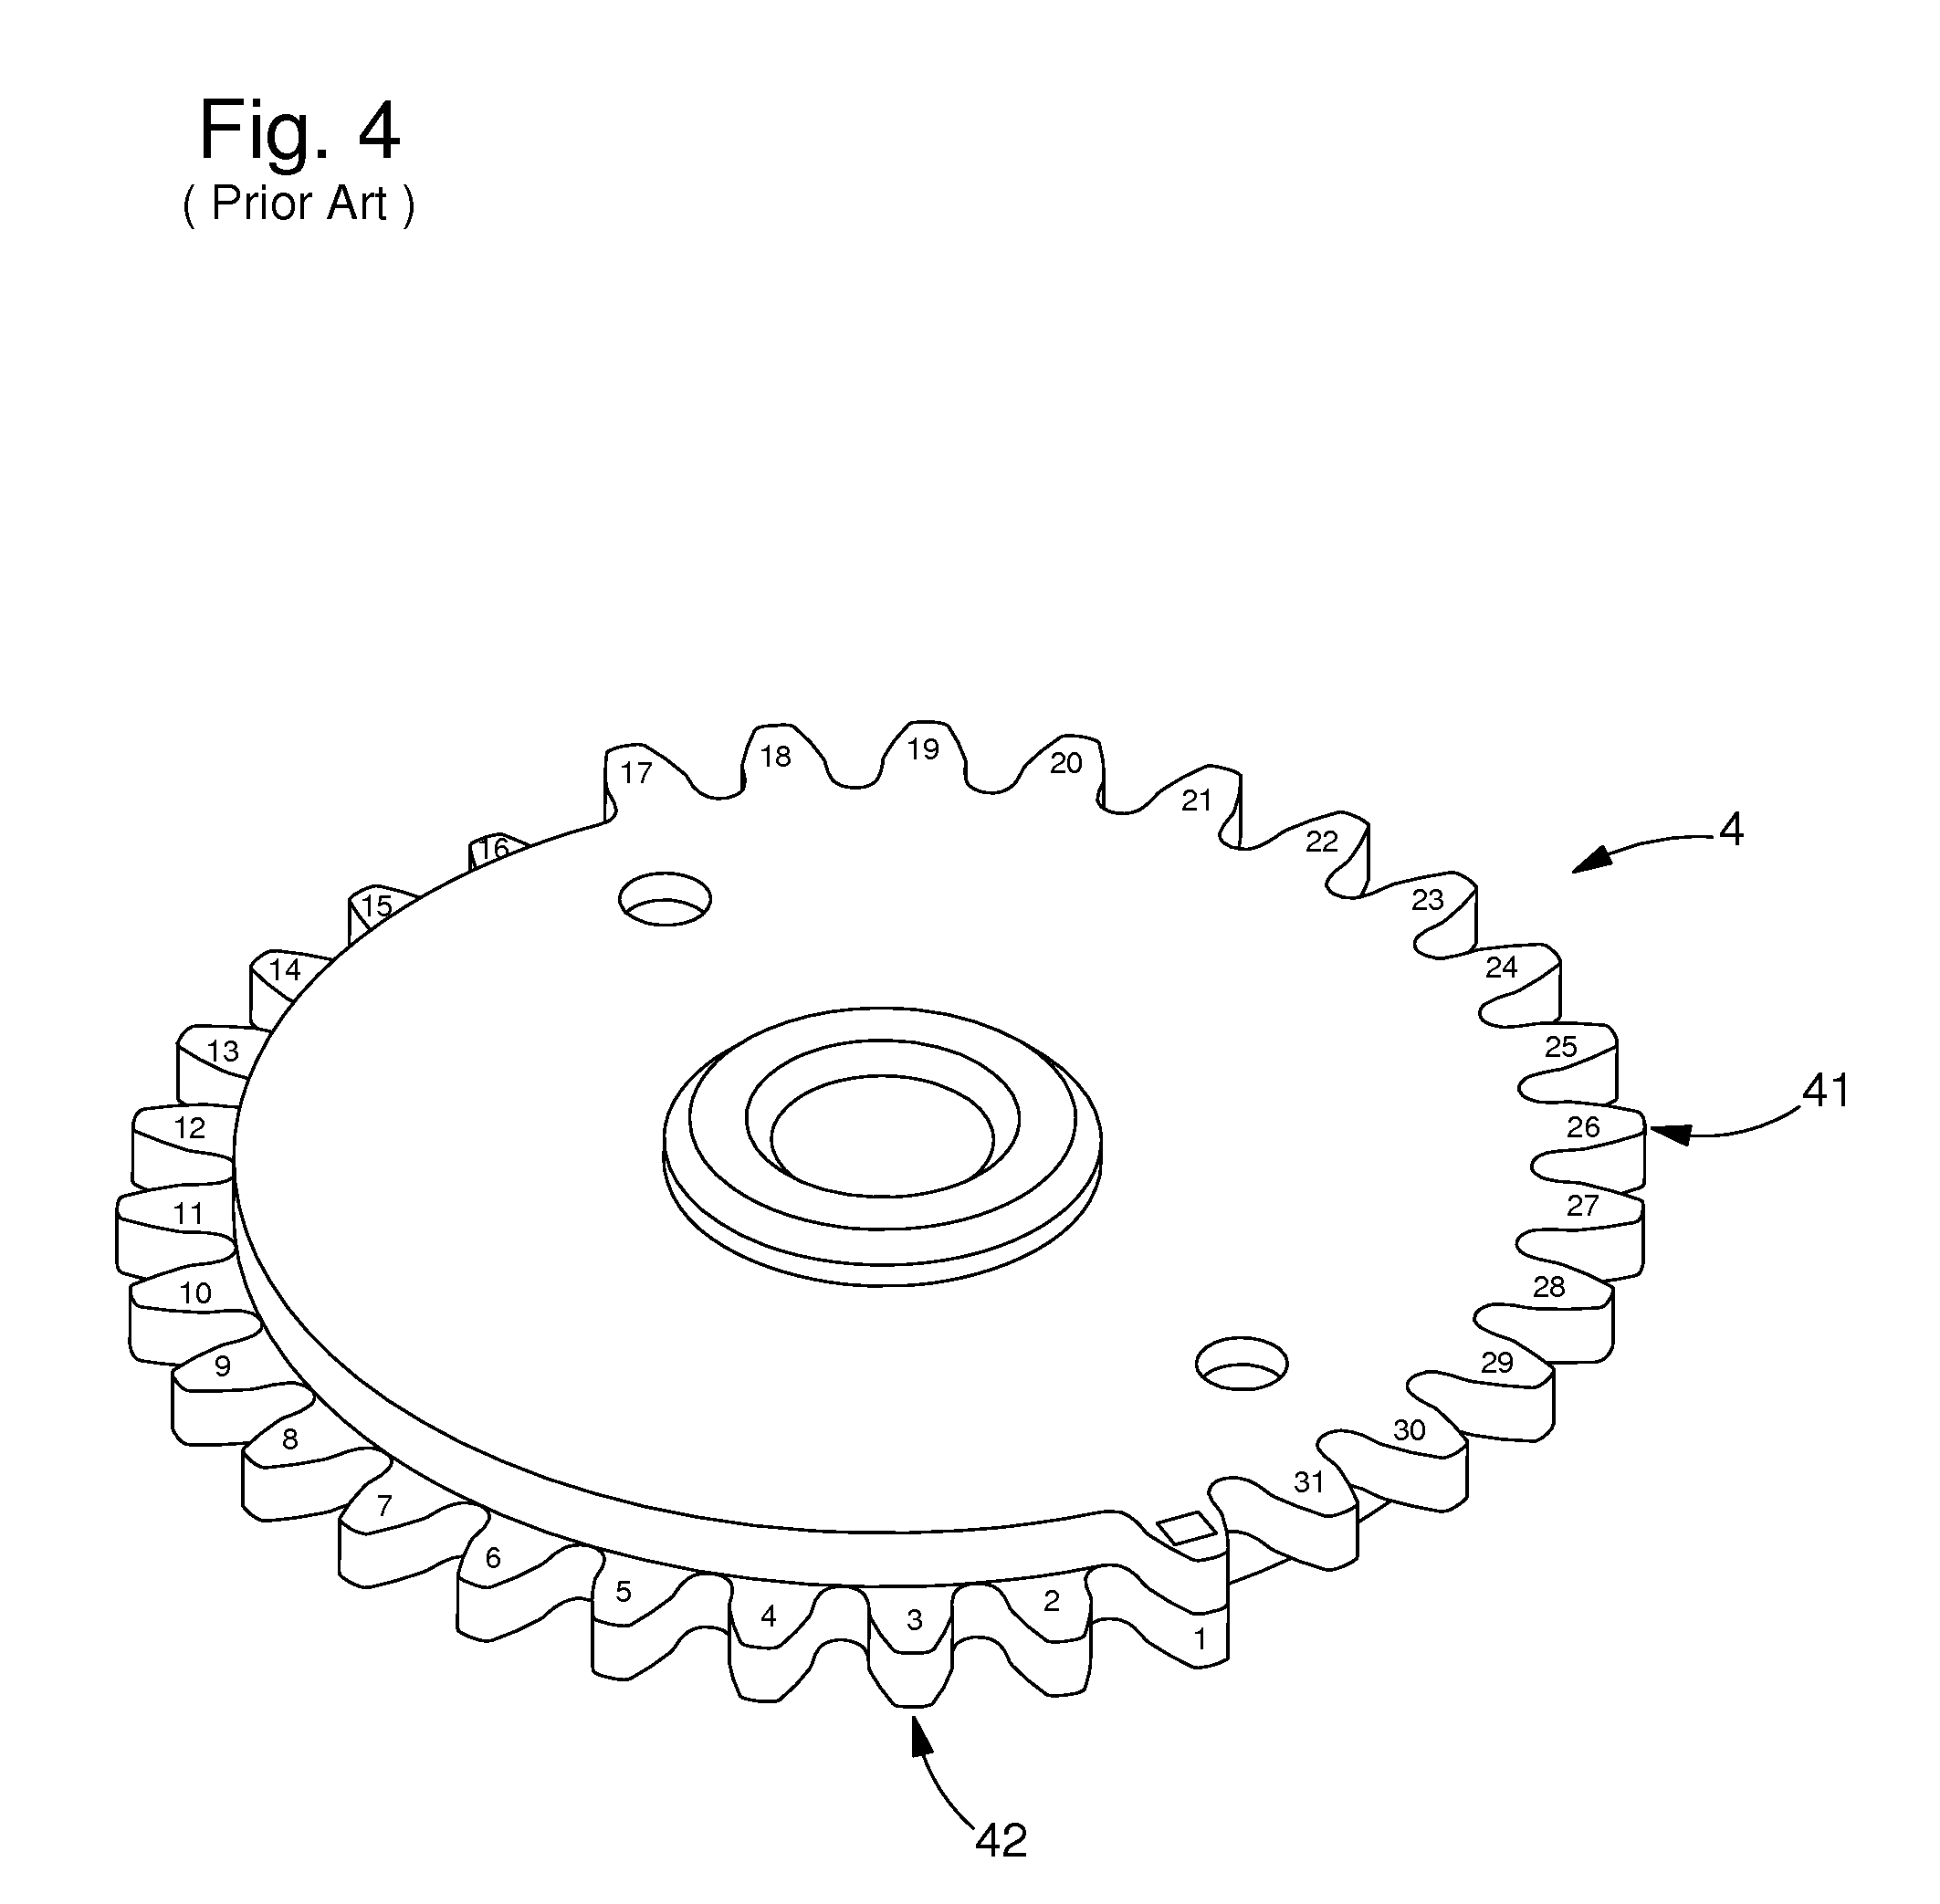 Device that assists in maintaining the position of a date indicator disc for a timepiece